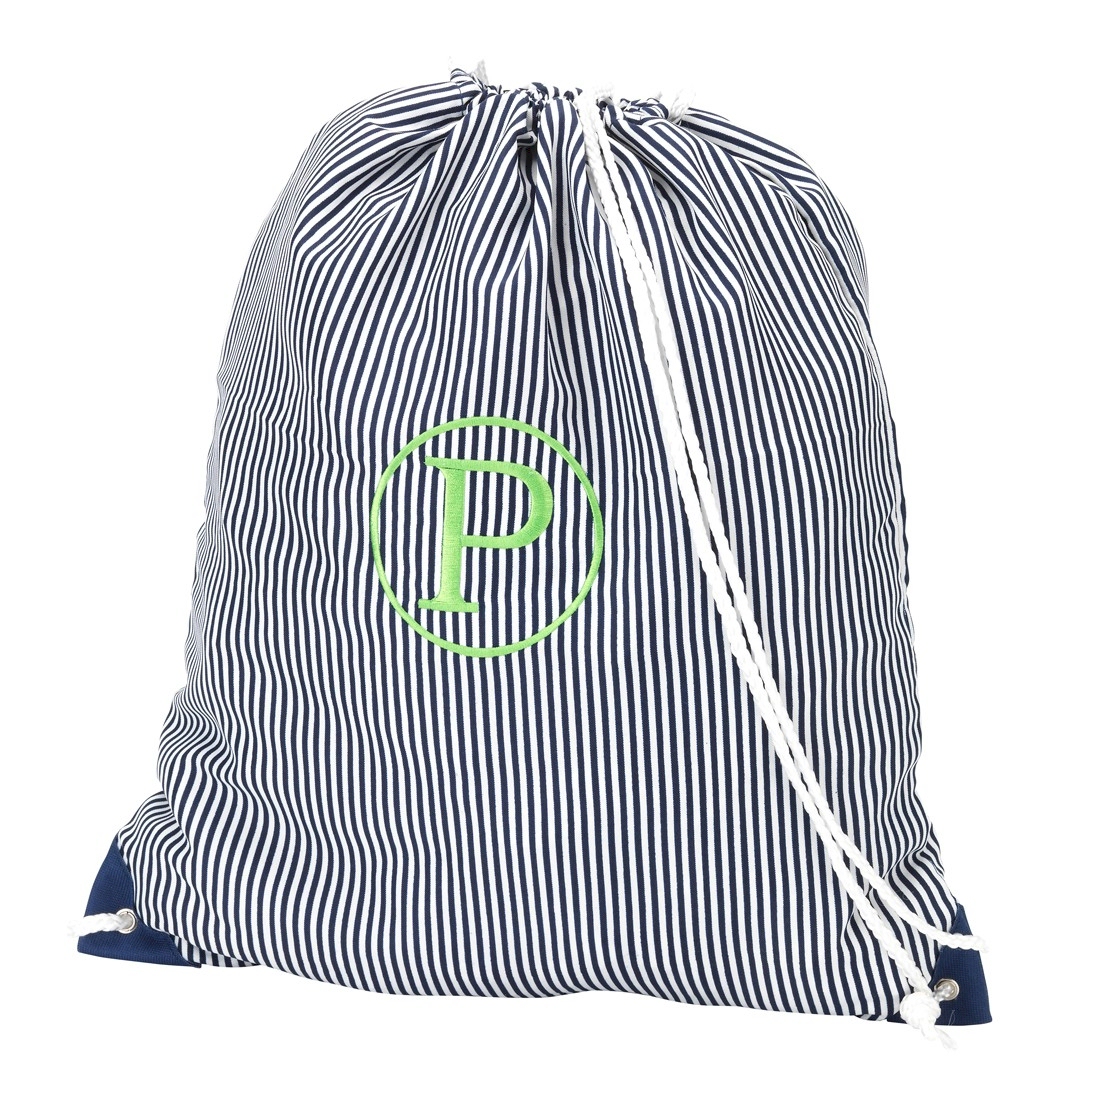 Gym Bag Drawstring Pack Embroidery Blanks - NAVY PINSTRIPE - CLOSEOUT